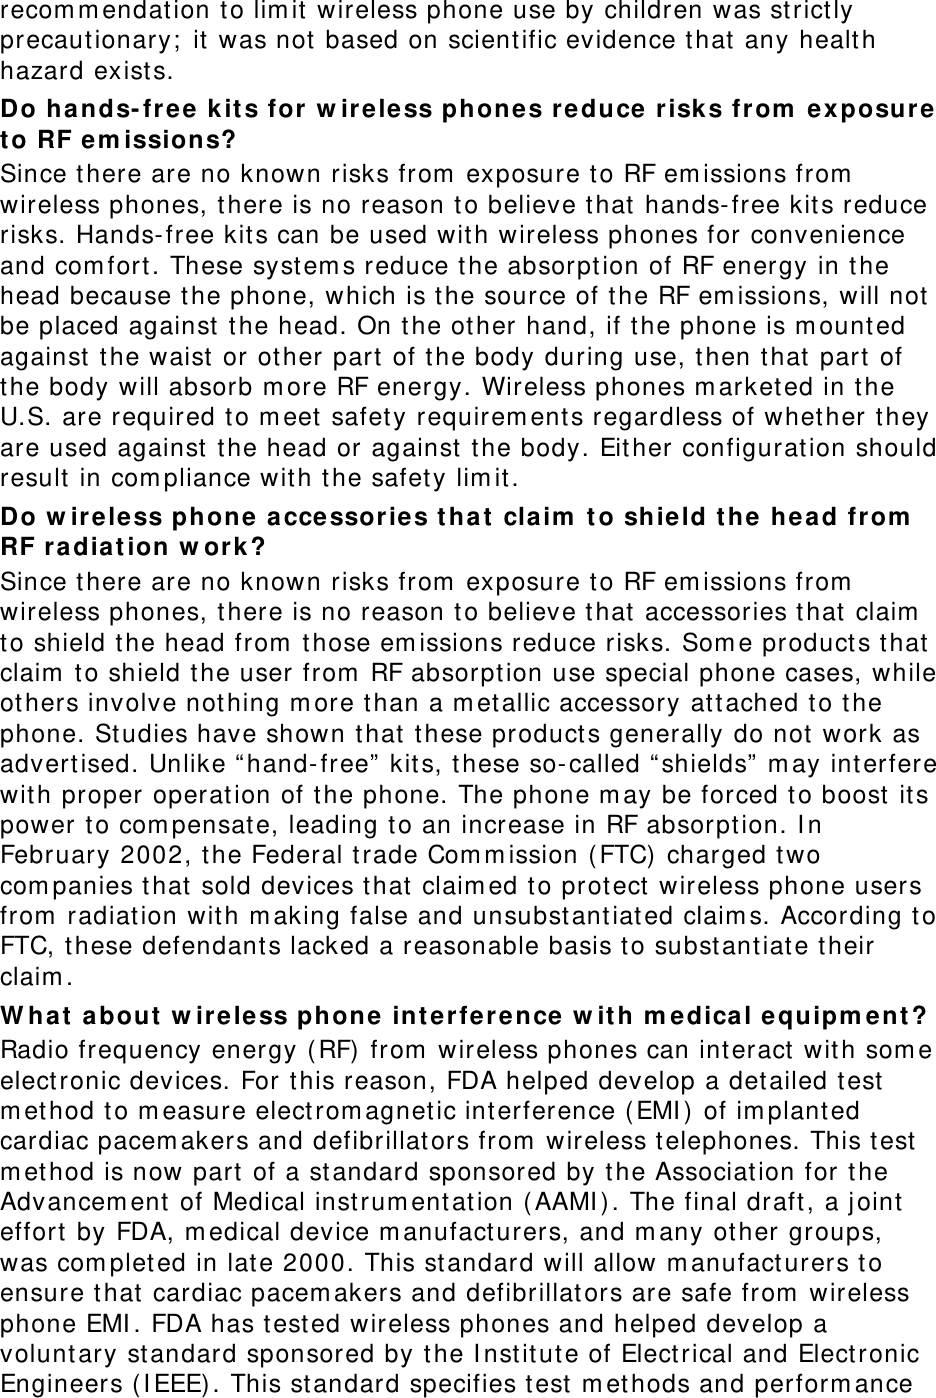 recommendation to limit wireless phone use by children was strictly precautionary; it was not based on scientific evidence that any health hazard exists.  Do hands-free kits for wireless phones reduce risks from exposure to RF emissions? Since there are no known risks from exposure to RF emissions from wireless phones, there is no reason to believe that hands-free kits reduce risks. Hands-free kits can be used with wireless phones for convenience and comfort. These systems reduce the absorption of RF energy in the head because the phone, which is the source of the RF emissions, will not be placed against the head. On the other hand, if the phone is mounted against the waist or other part of the body during use, then that part of the body will absorb more RF energy. Wireless phones marketed in the U.S. are required to meet safety requirements regardless of whether they are used against the head or against the body. Either configuration should result in compliance with the safety limit. Do wireless phone accessories that claim to shield the head from RF radiation work? Since there are no known risks from exposure to RF emissions from wireless phones, there is no reason to believe that accessories that claim to shield the head from those emissions reduce risks. Some products that claim to shield the user from RF absorption use special phone cases, while others involve nothing more than a metallic accessory attached to the phone. Studies have shown that these products generally do not work as advertised. Unlike “hand-free” kits, these so-called “shields” may interfere with proper operation of the phone. The phone may be forced to boost its power to compensate, leading to an increase in RF absorption. In February 2002, the Federal trade Commission (FTC) charged two companies that sold devices that claimed to protect wireless phone users from radiation with making false and unsubstantiated claims. According to FTC, these defendants lacked a reasonable basis to substantiate their claim. What about wireless phone interference with medical equipment? Radio frequency energy (RF) from wireless phones can interact with some electronic devices. For this reason, FDA helped develop a detailed test method to measure electromagnetic interference (EMI) of implanted cardiac pacemakers and defibrillators from wireless telephones. This test method is now part of a standard sponsored by the Association for the Advancement of Medical instrumentation (AAMI). The final draft, a joint effort by FDA, medical device manufacturers, and many other groups, was completed in late 2000. This standard will allow manufacturers to ensure that cardiac pacemakers and defibrillators are safe from wireless phone EMI. FDA has tested wireless phones and helped develop a voluntary standard sponsored by the Institute of Electrical and Electronic Engineers (IEEE). This standard specifies test methods and performance 